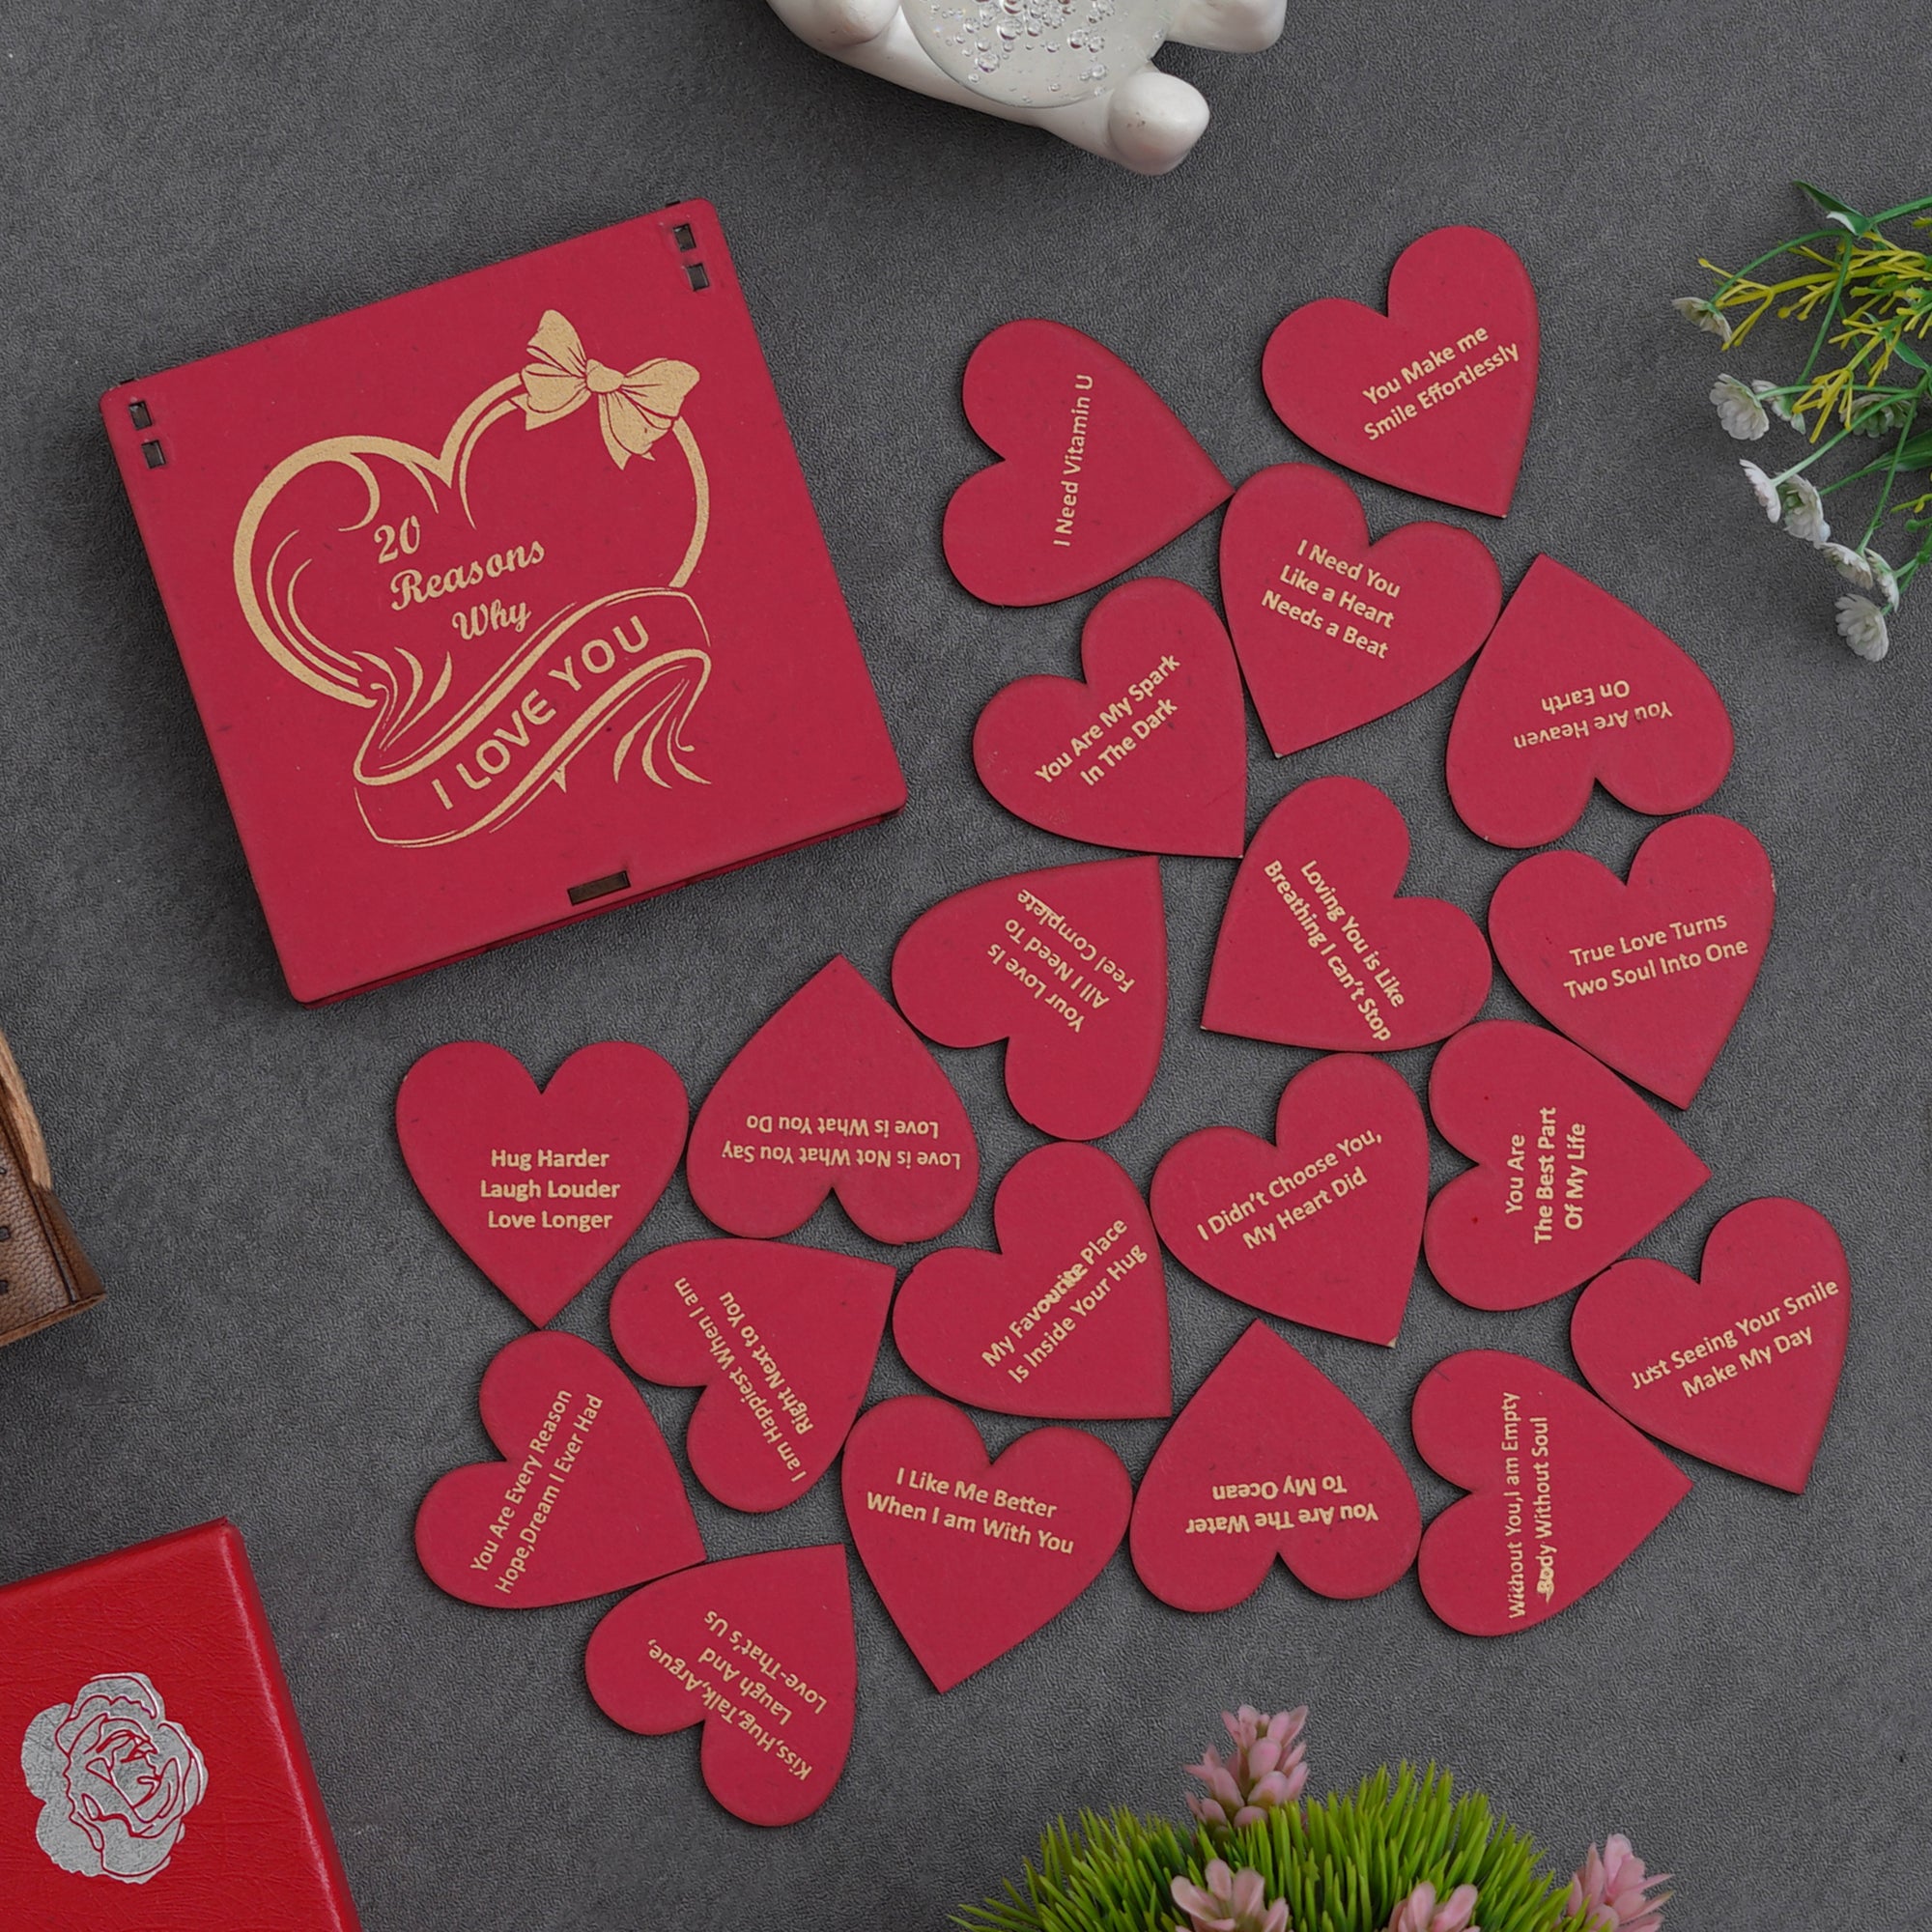 Valentine Combo of Pack of 8 Love Gift Cards, Red Gift Box with Teddy & Roses, "20 Reasons Why I Love You" Printed on Little Red Hearts Decorative Wooden Gift Set Box 5